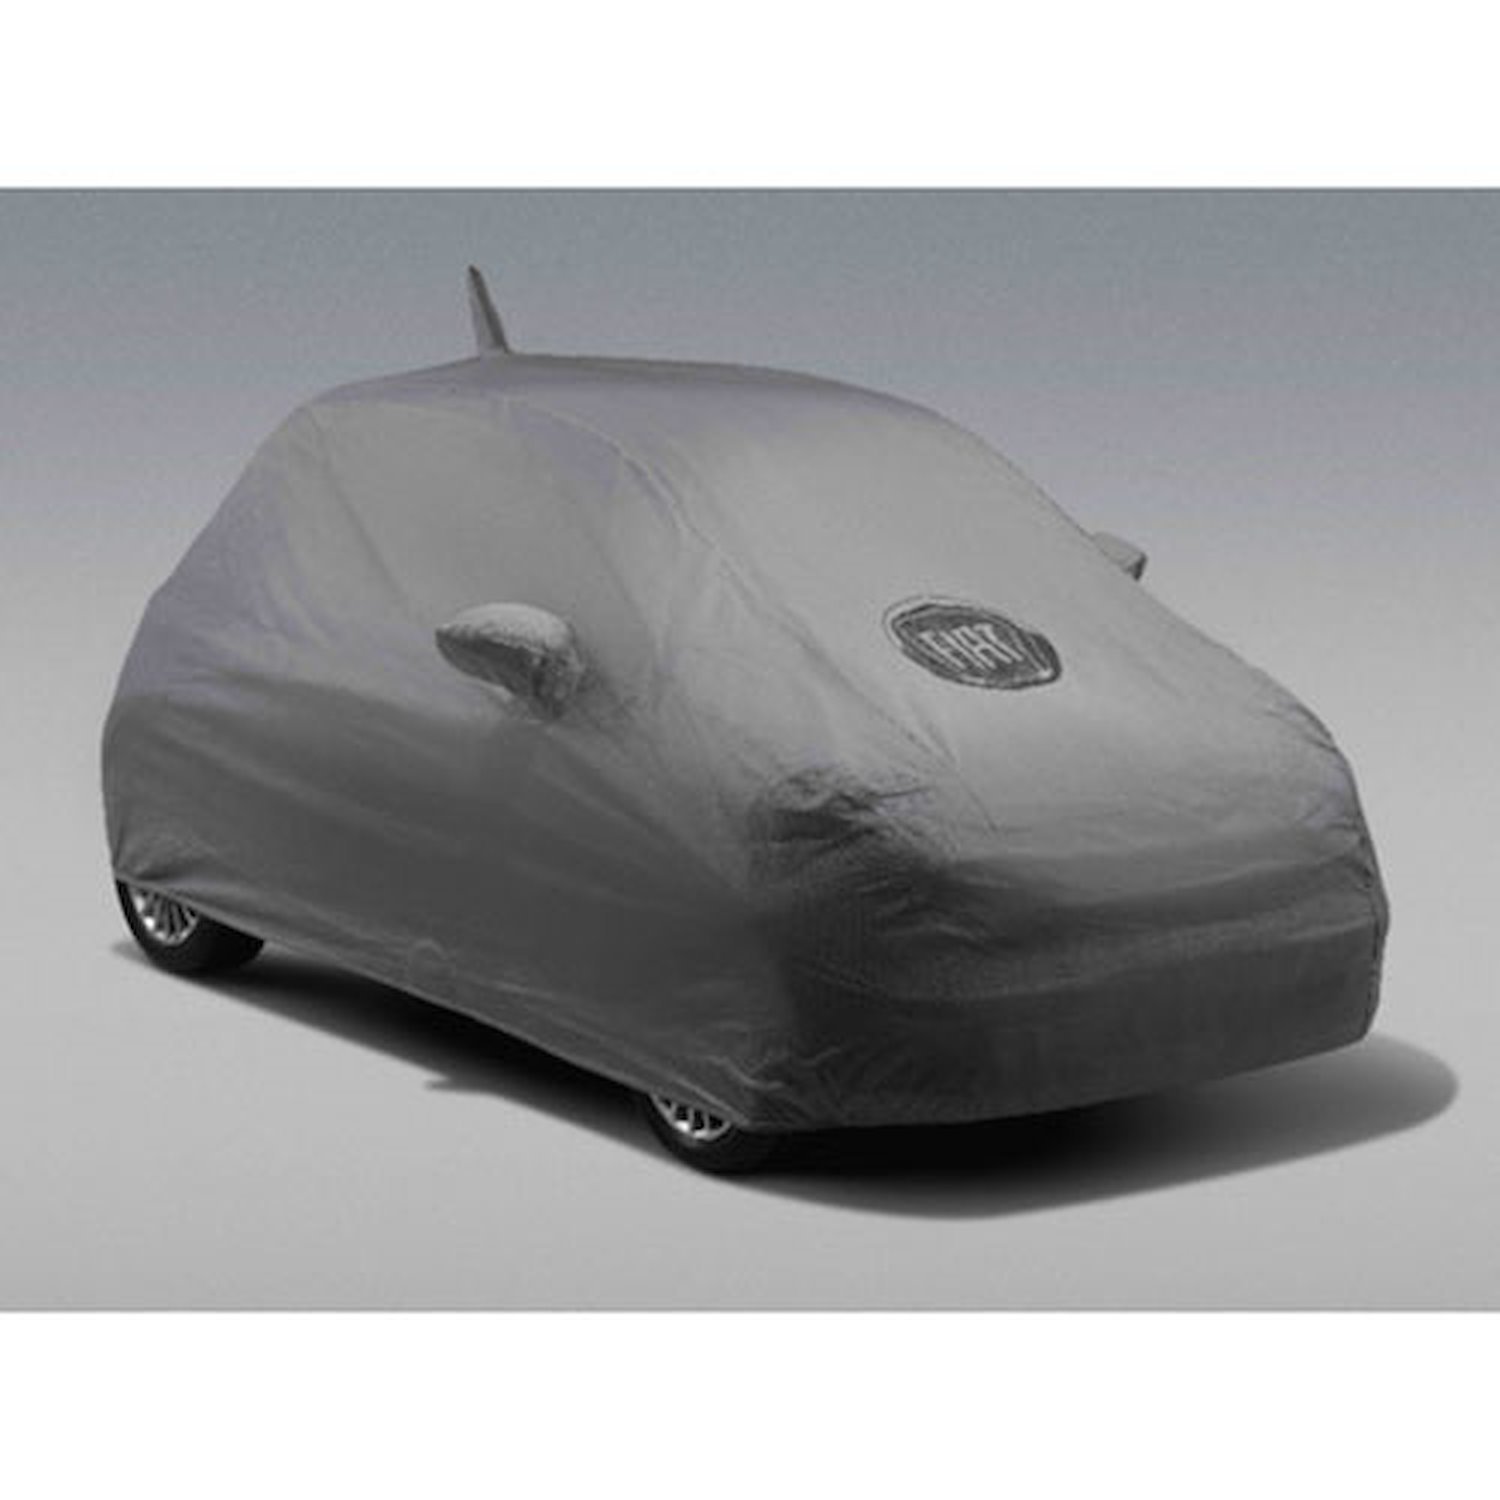 Full Vehicle Cover 2013 Fiat 500 Coupe